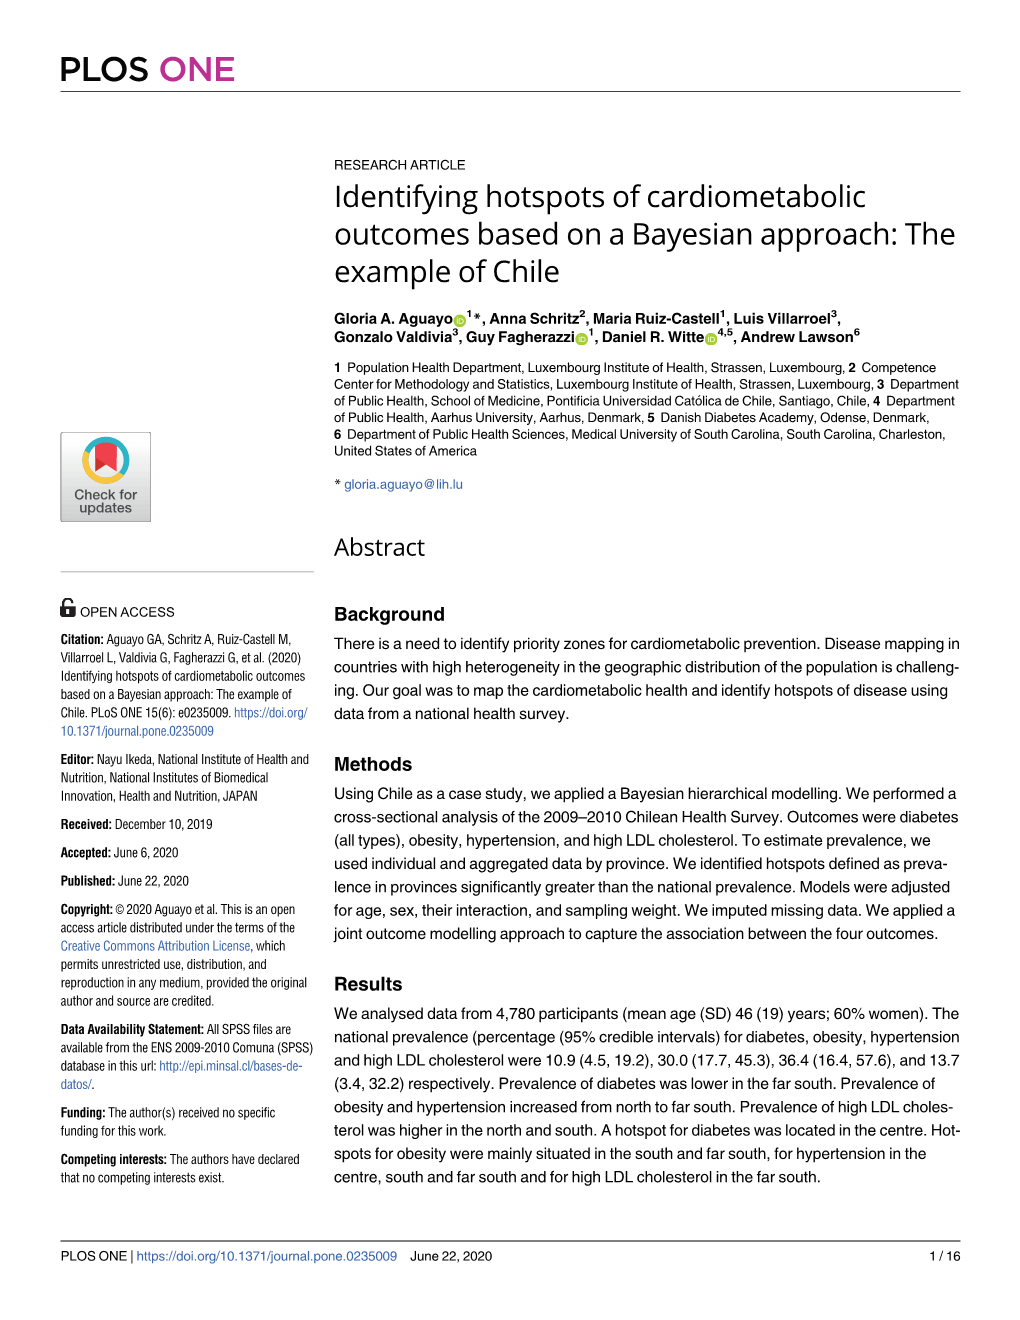 Identifying Hotspots of Cardiometabolic Outcomes Based on a Bayesian Approach: the Example of Chile